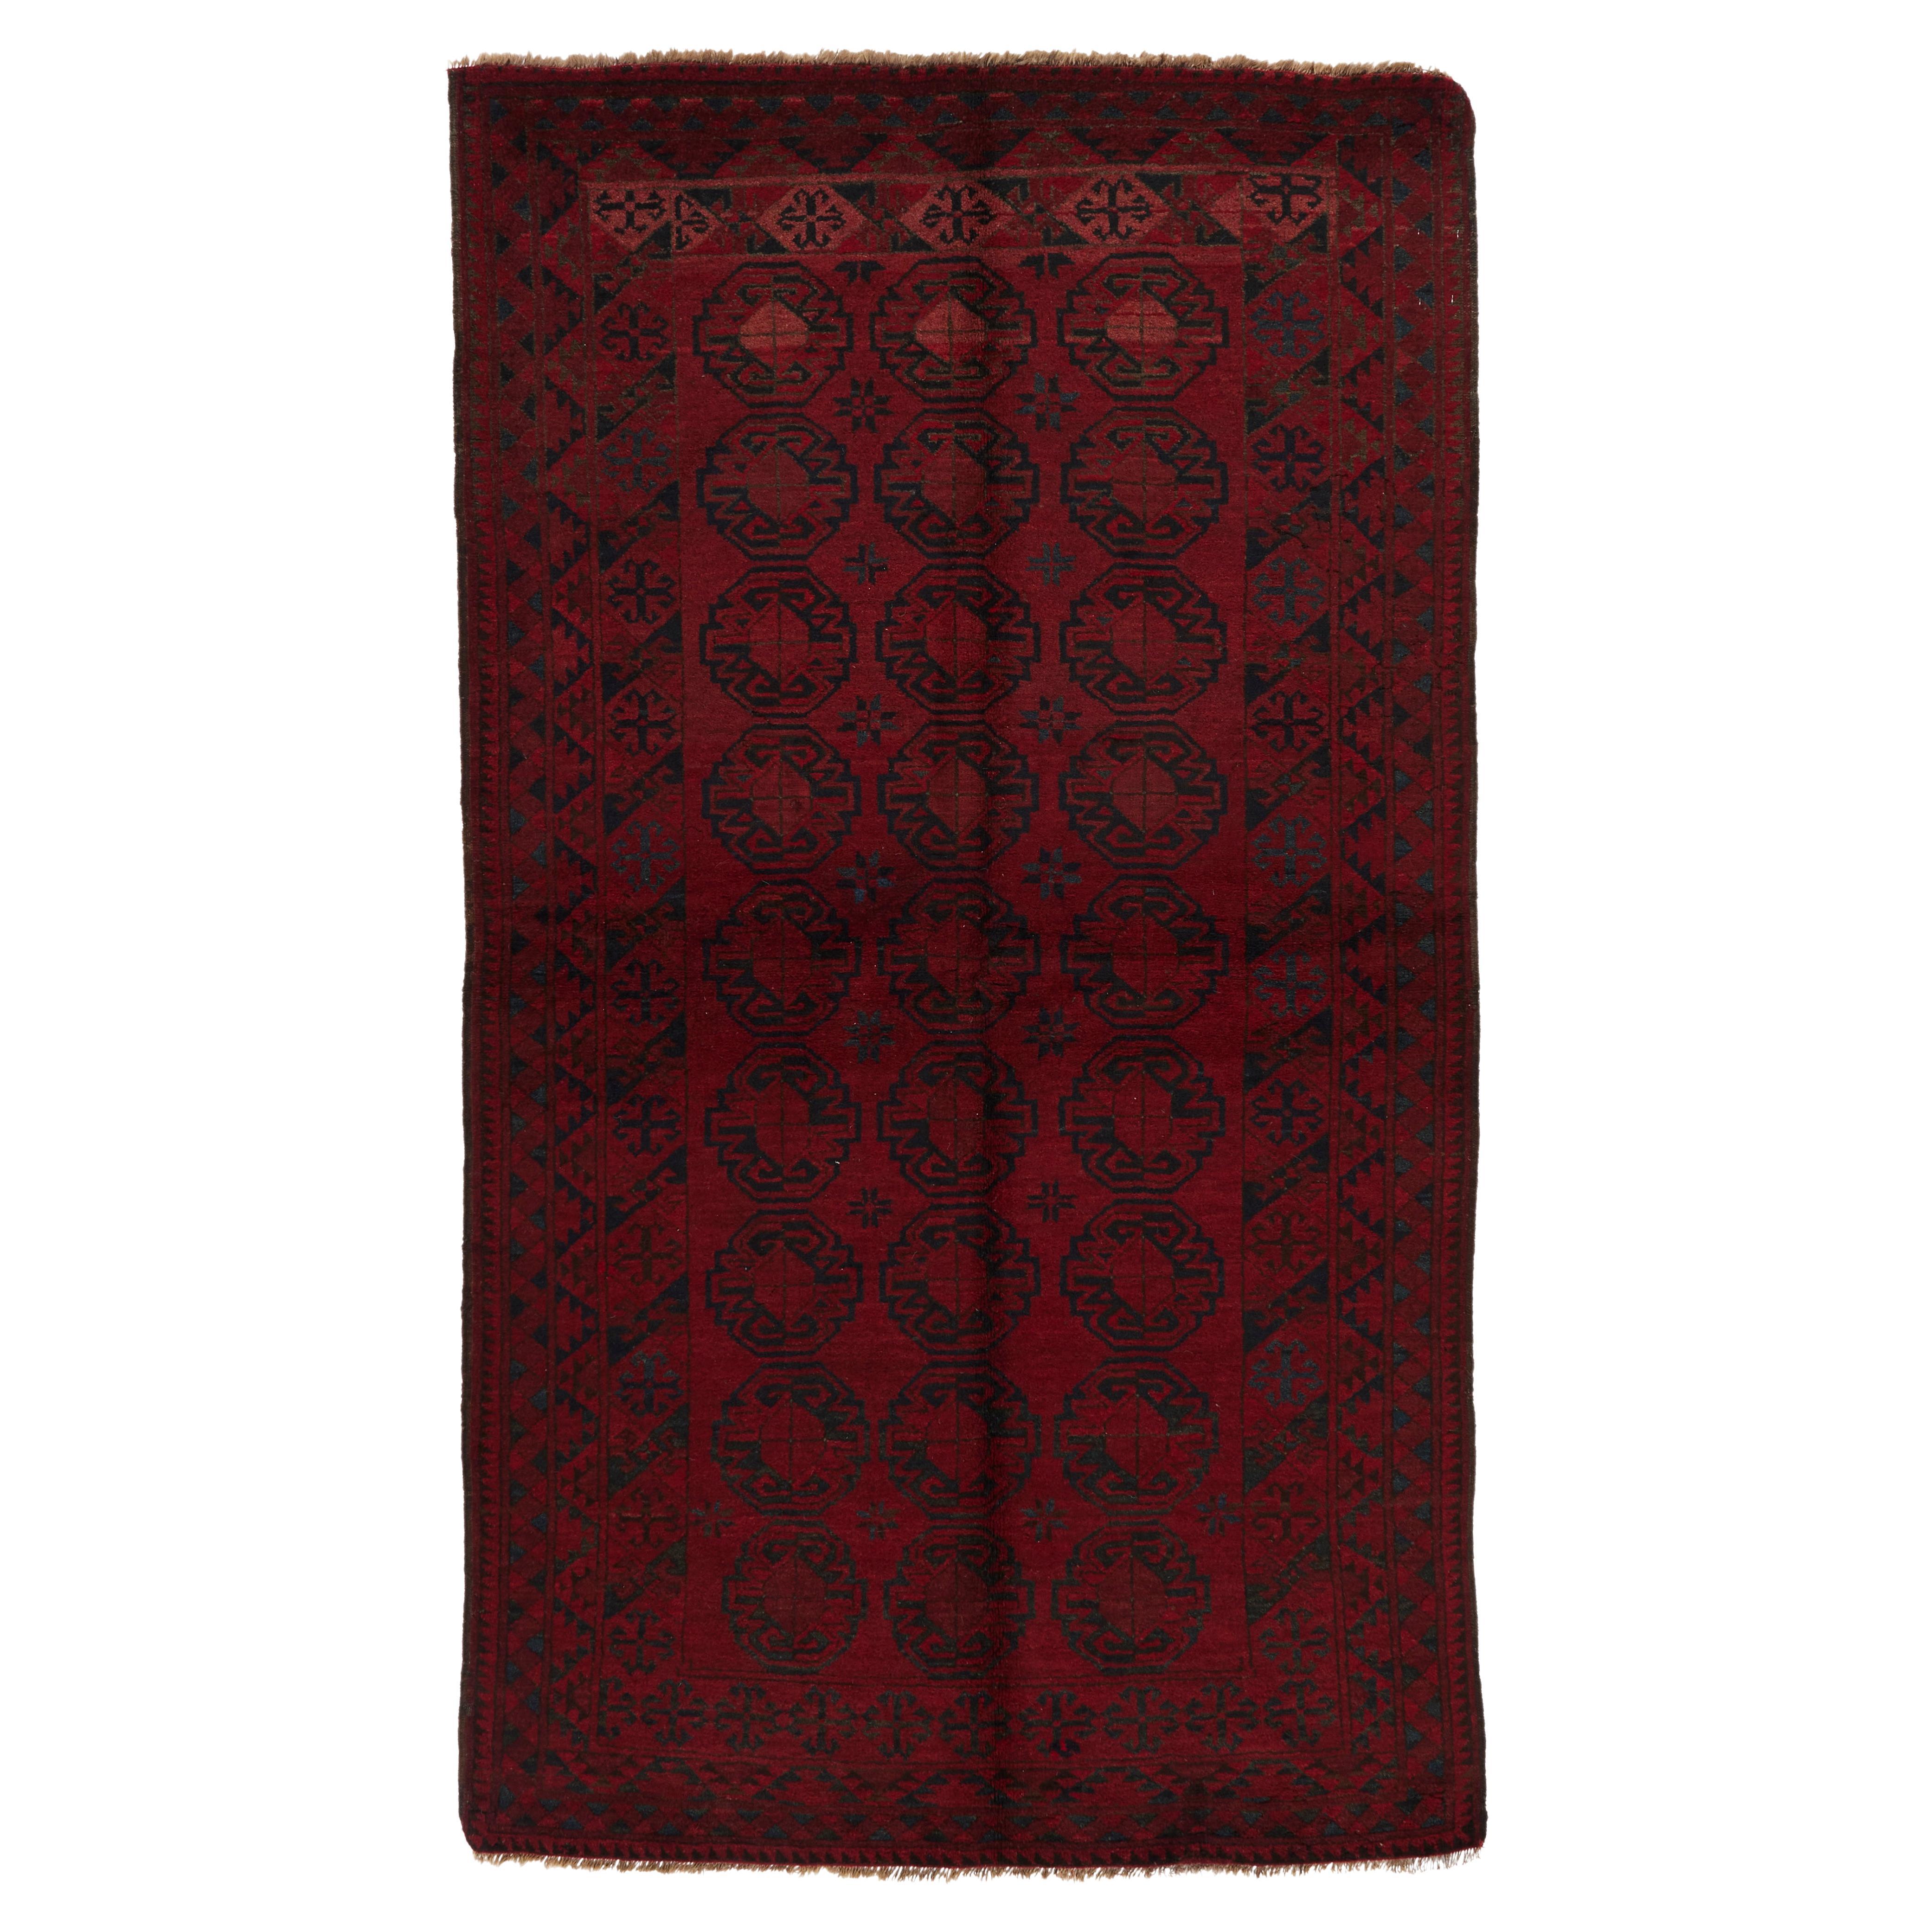 Early 20th Century ANTIQUE AFGHAN ERSARI features a repeating boteh motif